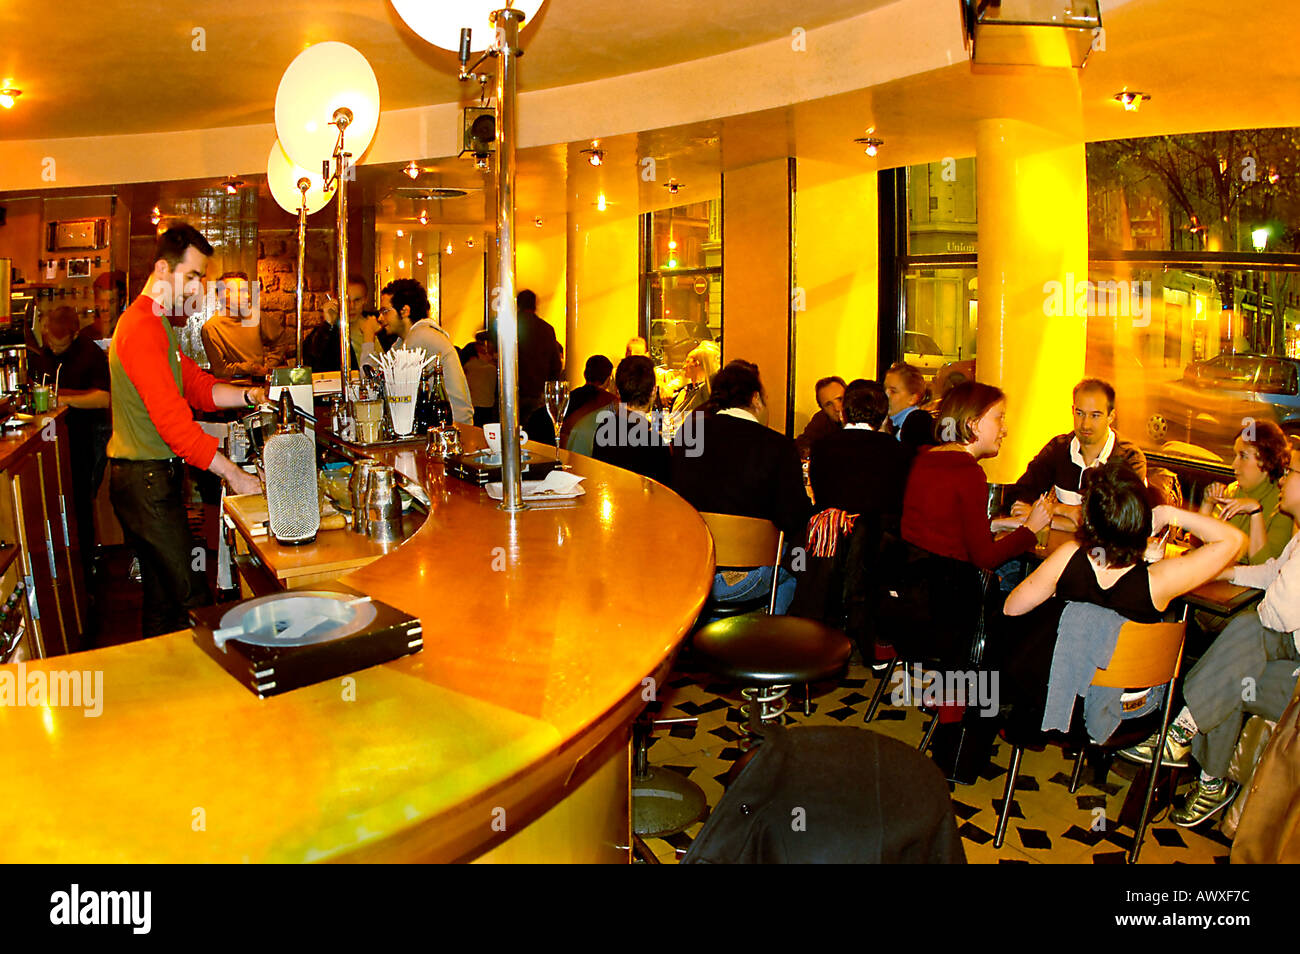 PARIS France, Crowd of People Drinking, interior French Café, Bistro Bar 'L'Endroit'  Inside, working at night, inside busy bar france, cocktails, Stock Photo